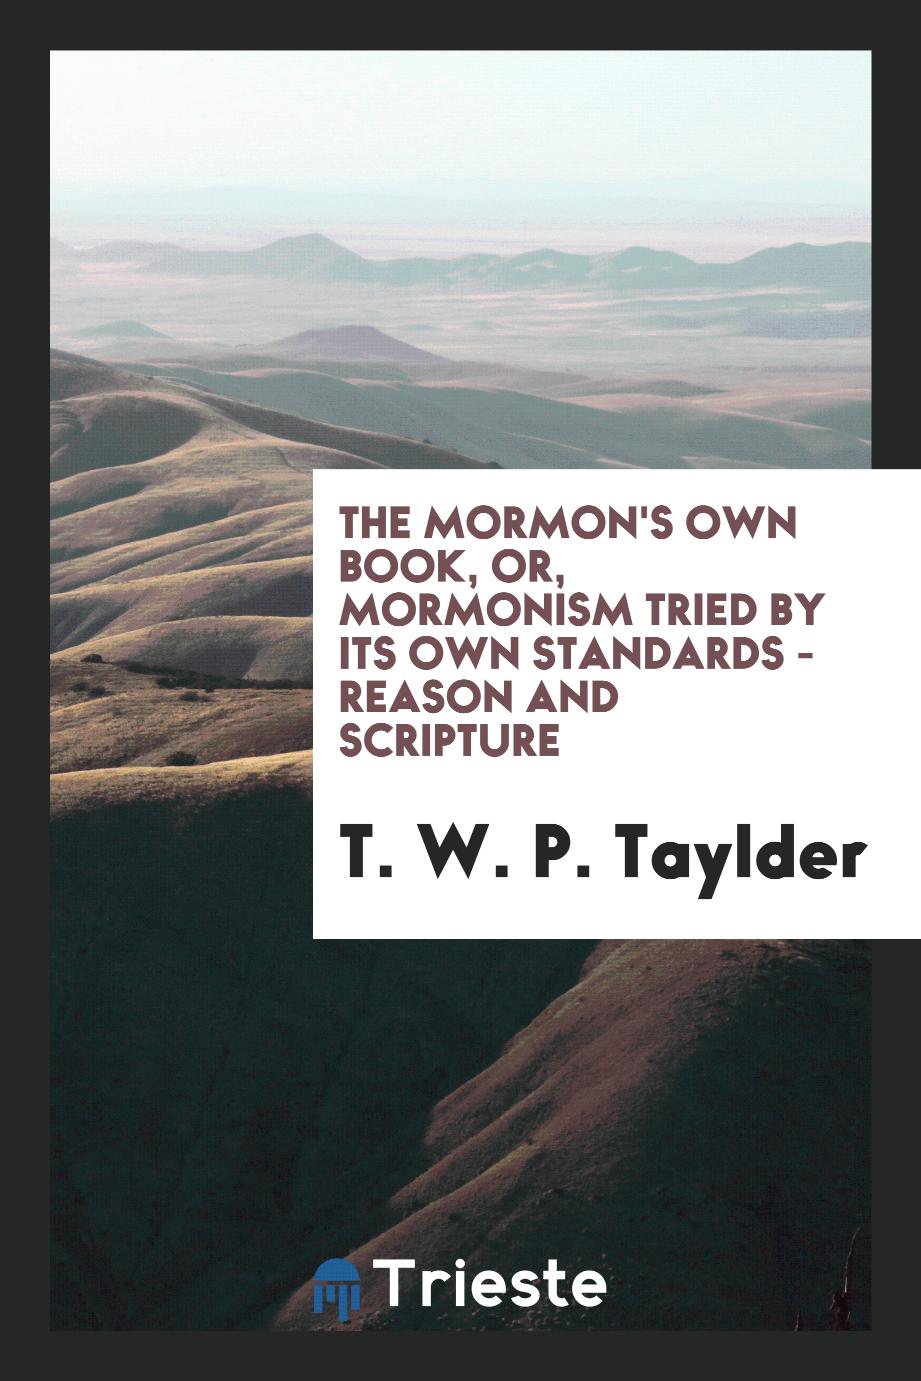 The Mormon's own book, or, Mormonism tried by its own standards - reason and scripture